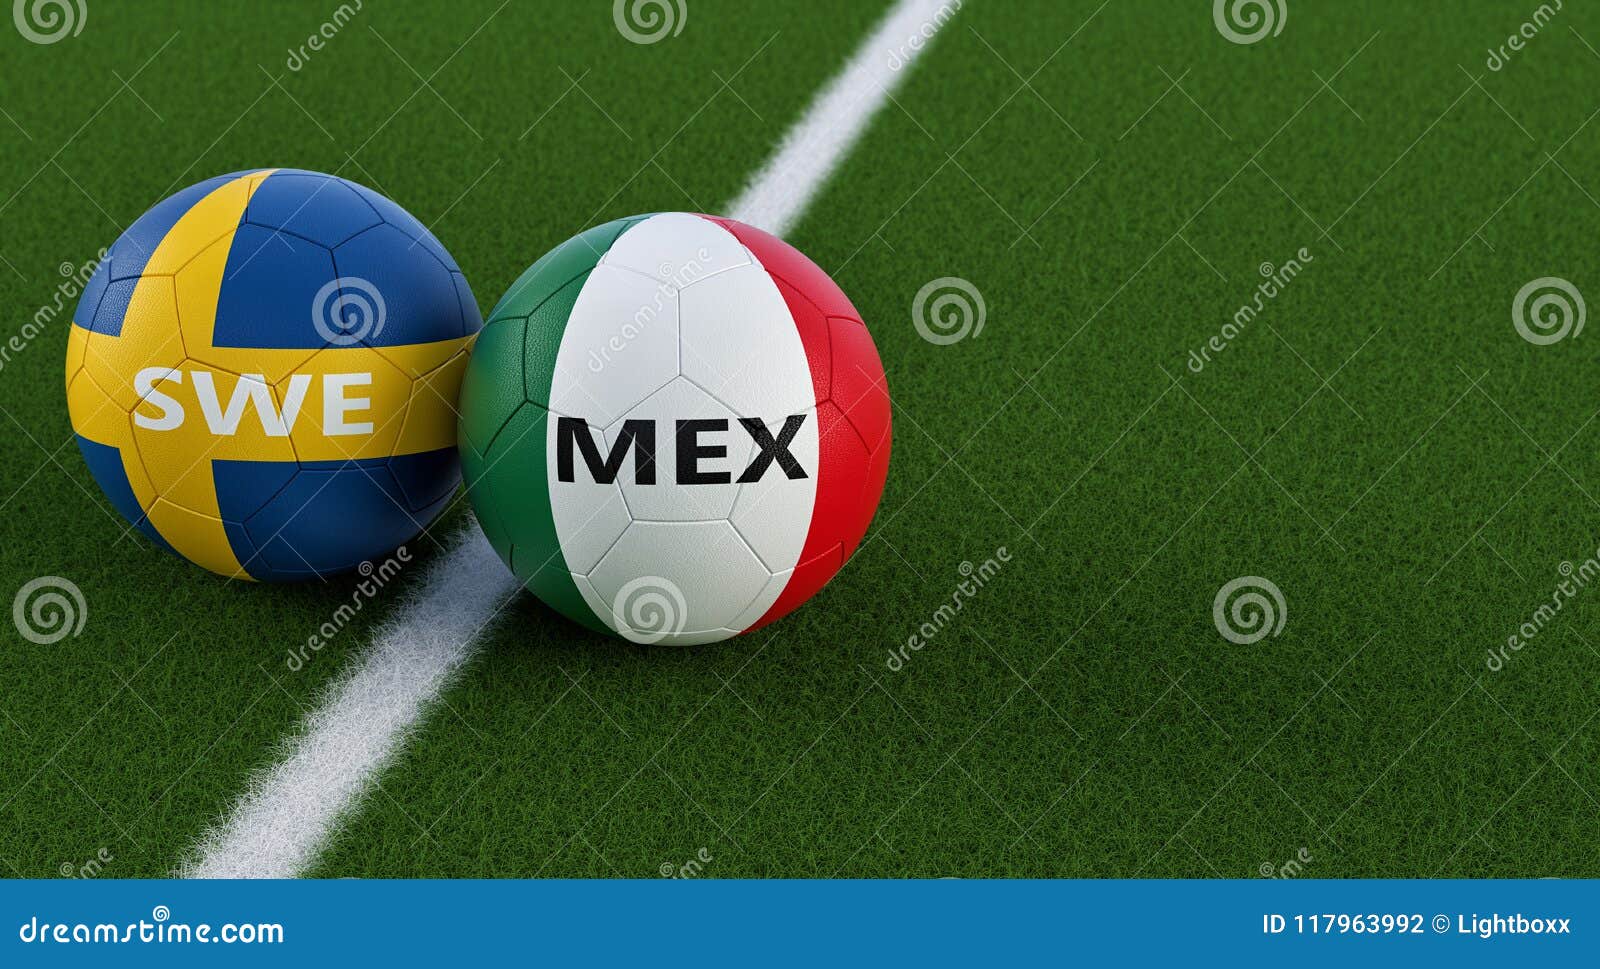 mexico vs. sweden soccer match - soccer balls in mexicos and swedens national colors on a soccer field.